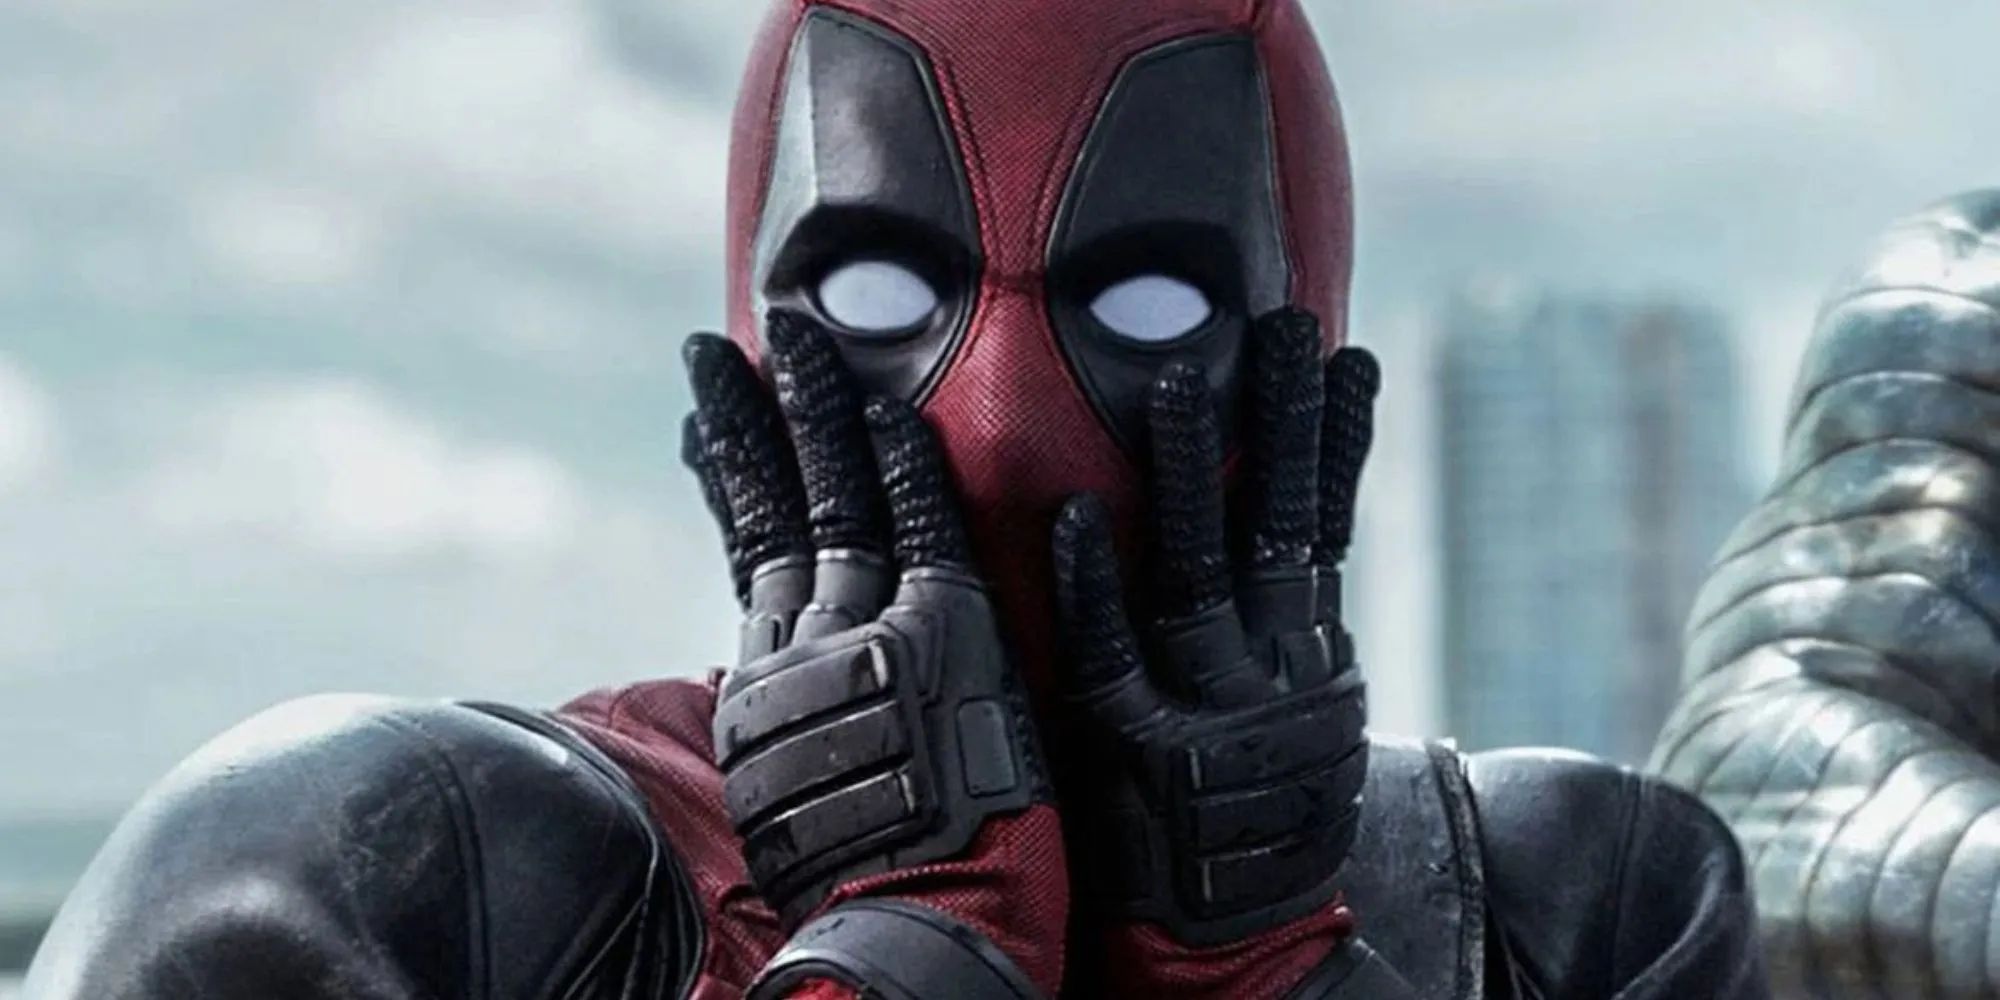 Movie Deadpool Making A Shocked Expression